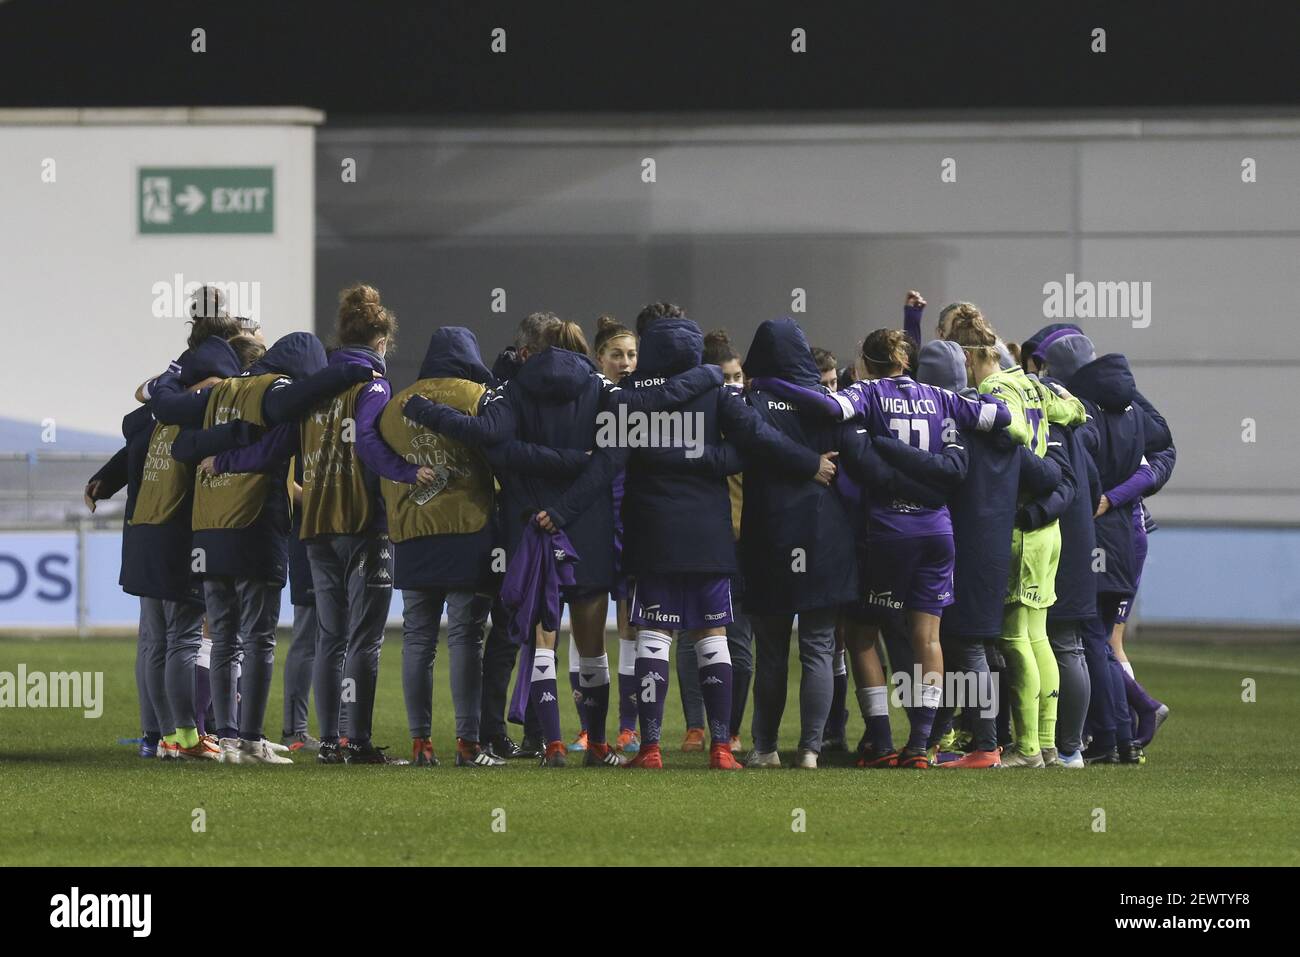 Manchester, UK. 03rd Mar, 2021. Fiorentina team huddle during the UEFA Women's Champions League round of 16 match between Manchester City and Fiorentina at the Academy Stadium, Manchester, UK. Credit: SPP Sport Press Photo. /Alamy Live News Stock Photo